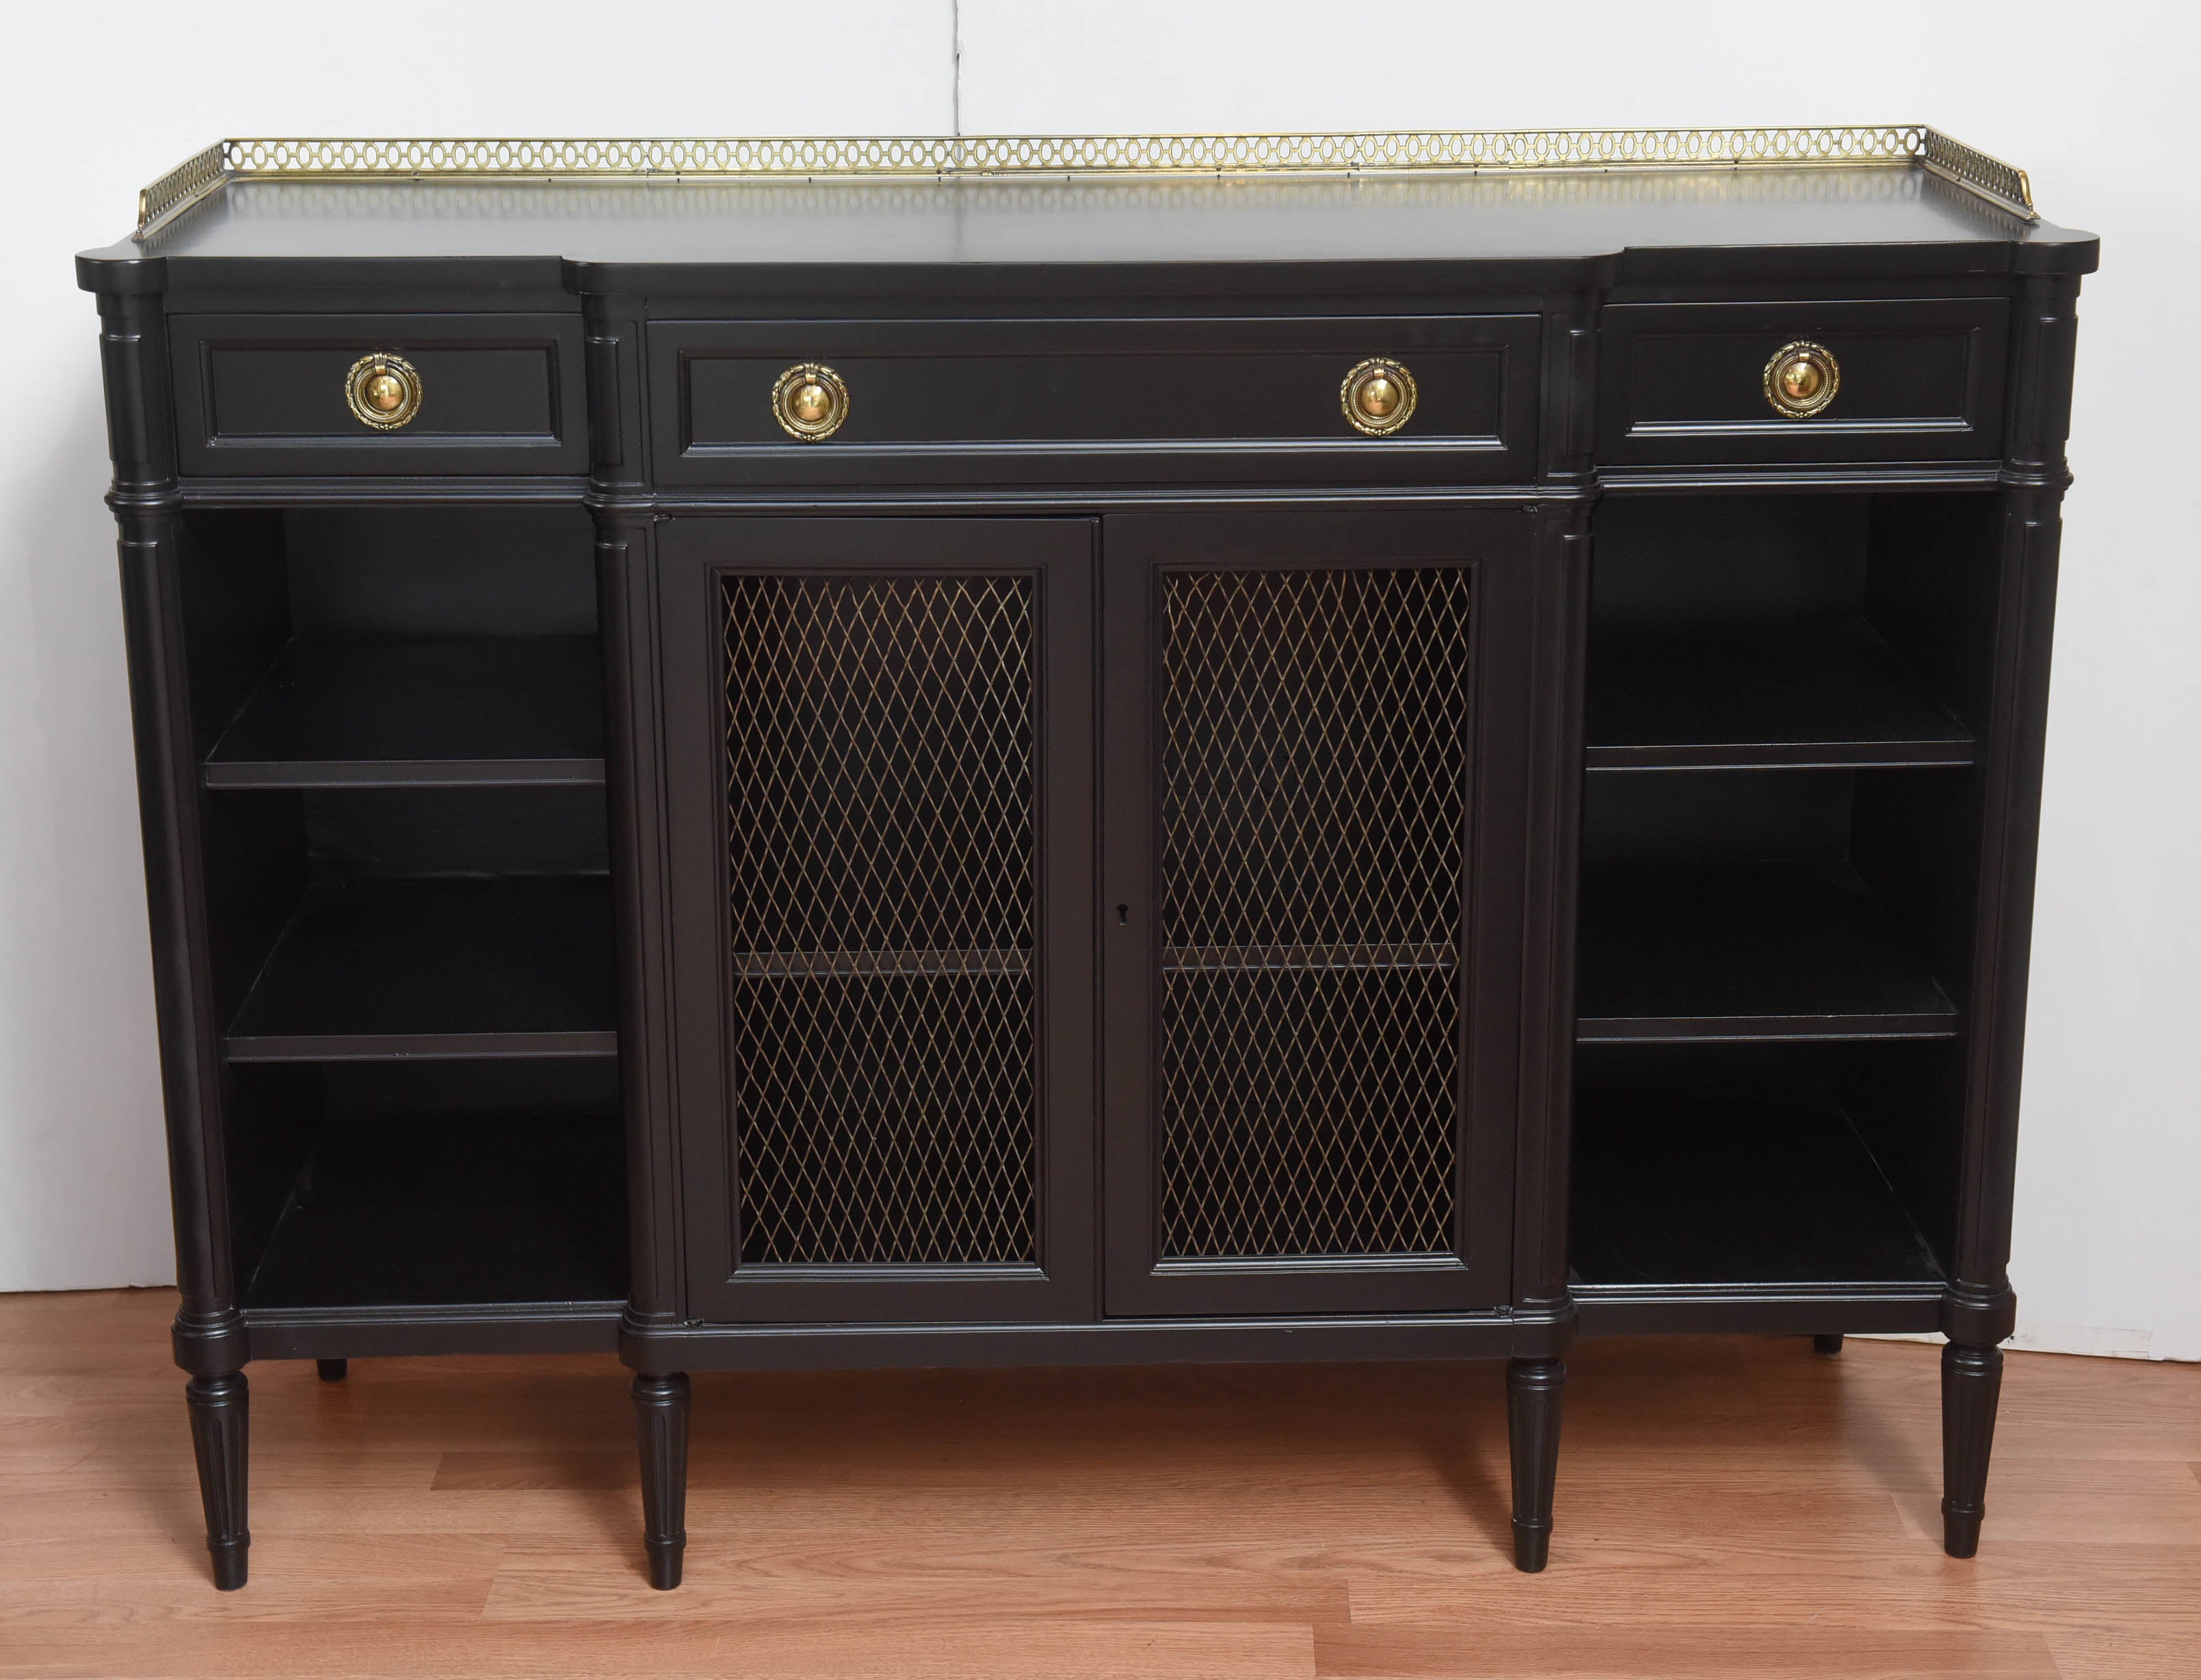 Directoire style buffet/server with brass chicken wire doors, brass hardware and gallery.